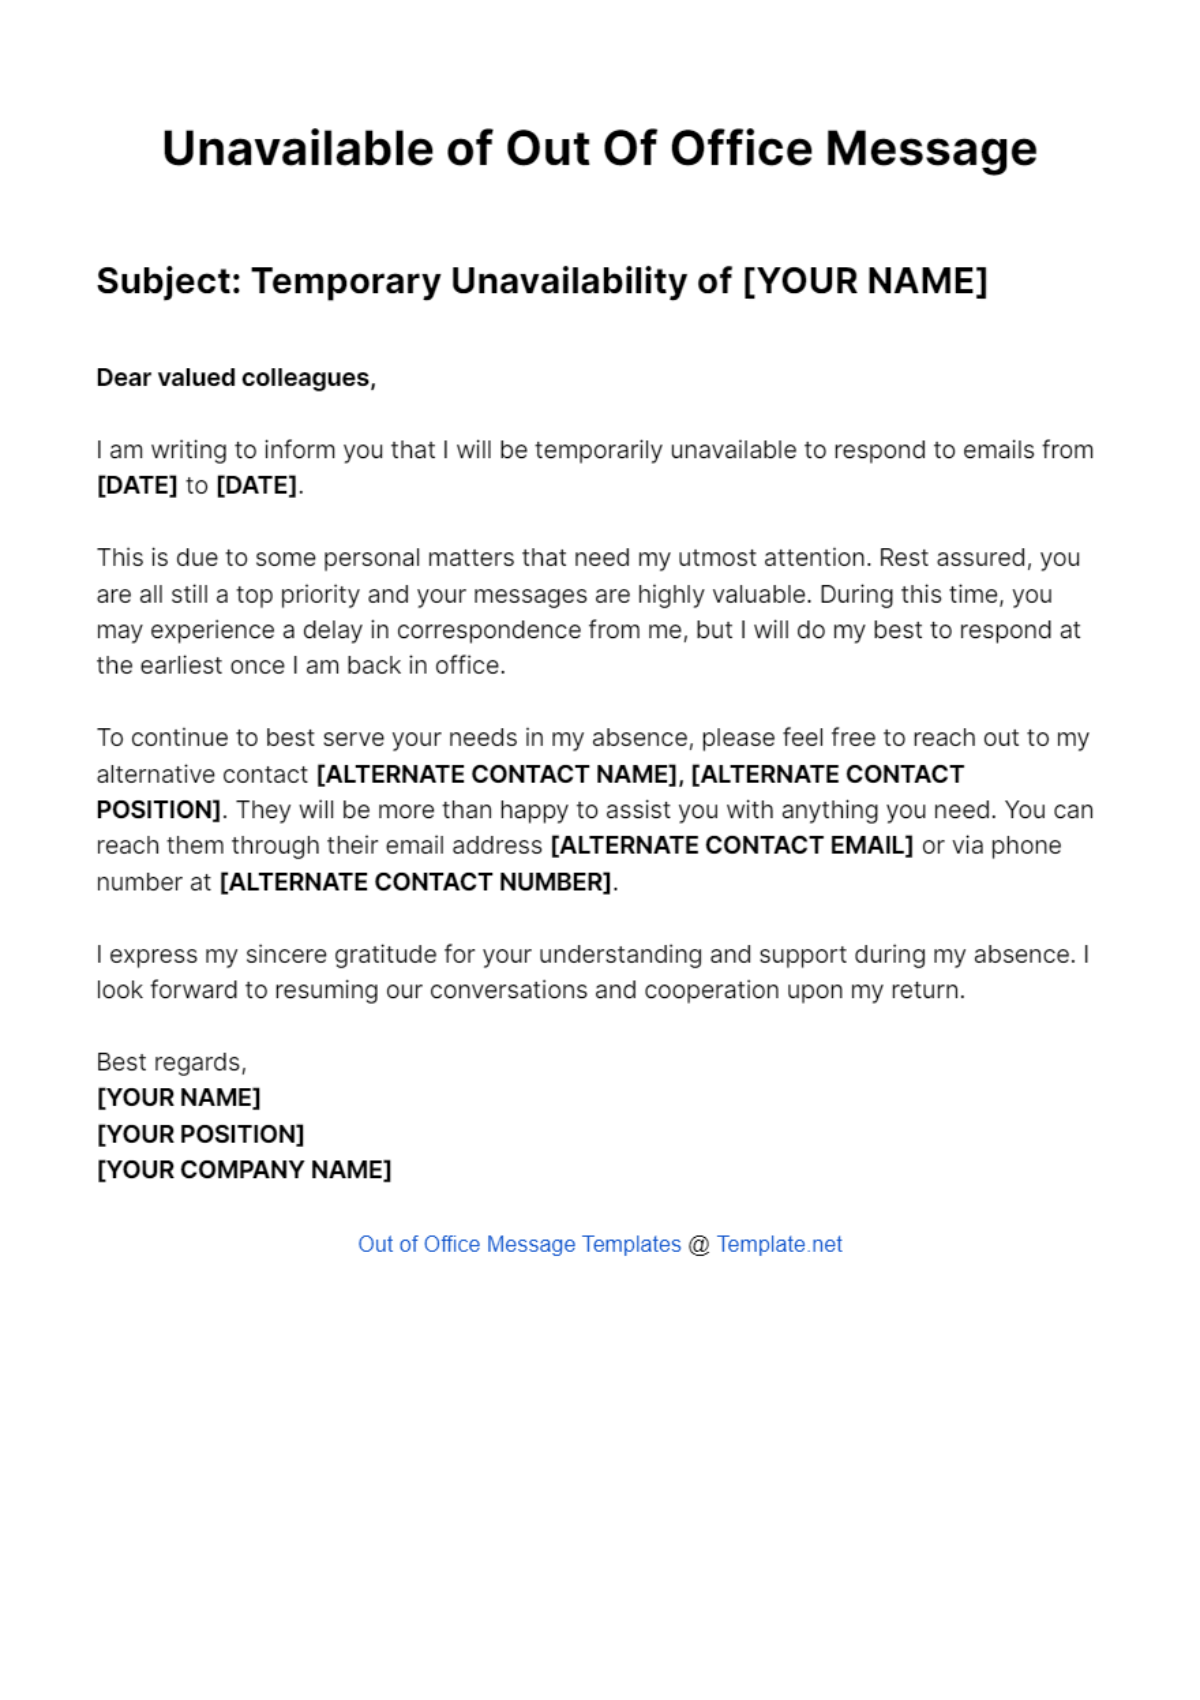 Unavailable of Out Of Office Message Template